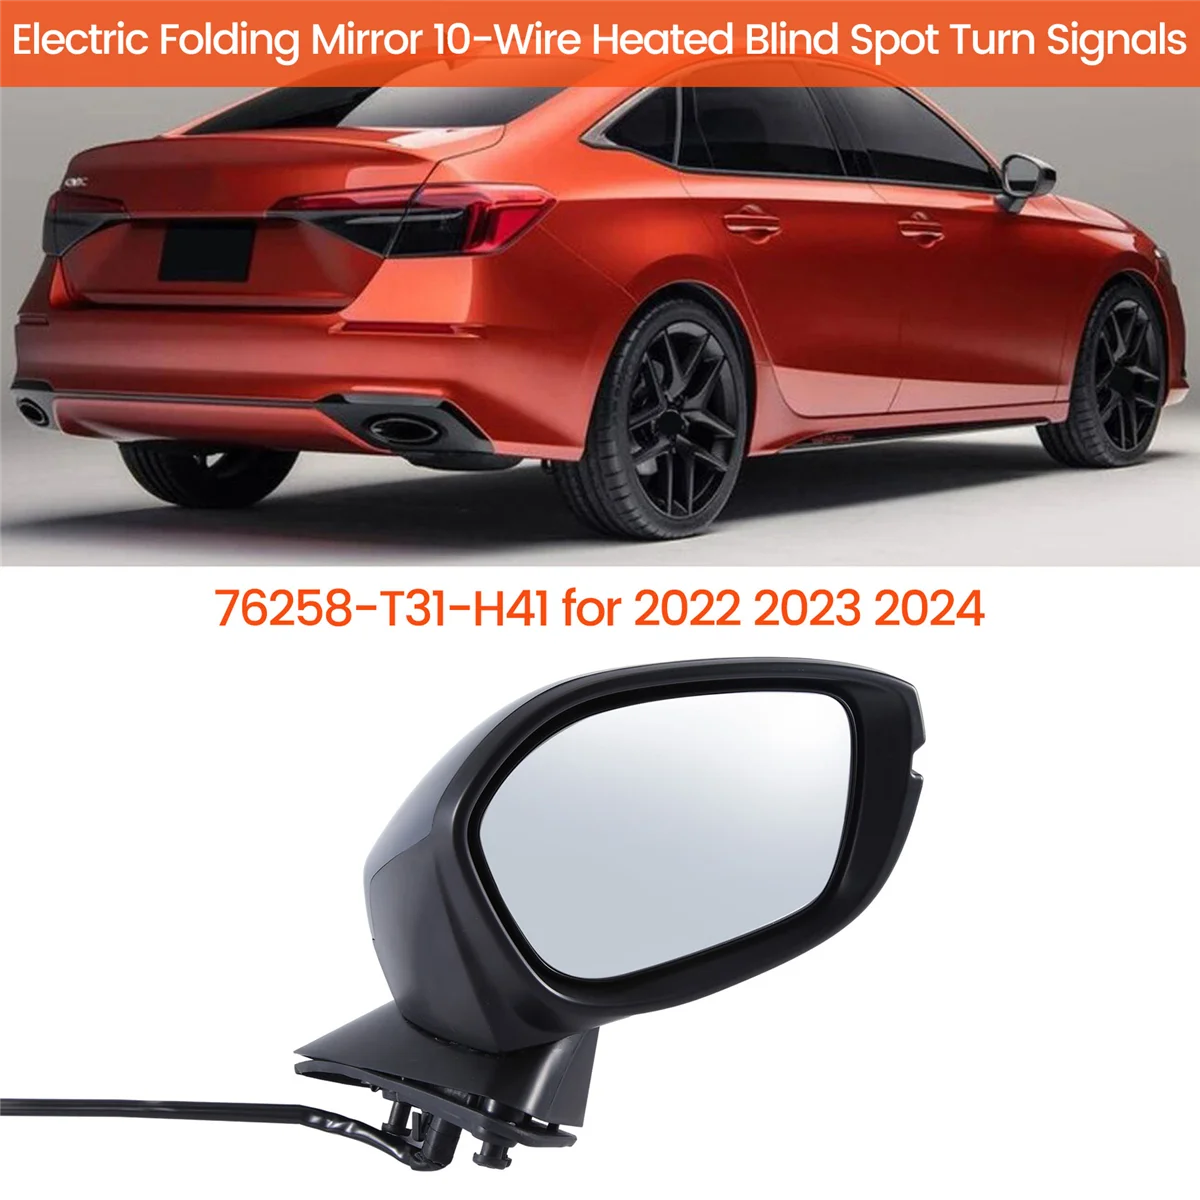 

Right Electric Folding Rear View Mirror Assy 76208-T31-H41 for Honda Civic 2022 2023 10-Wire W/Heated Blind Spot Signals